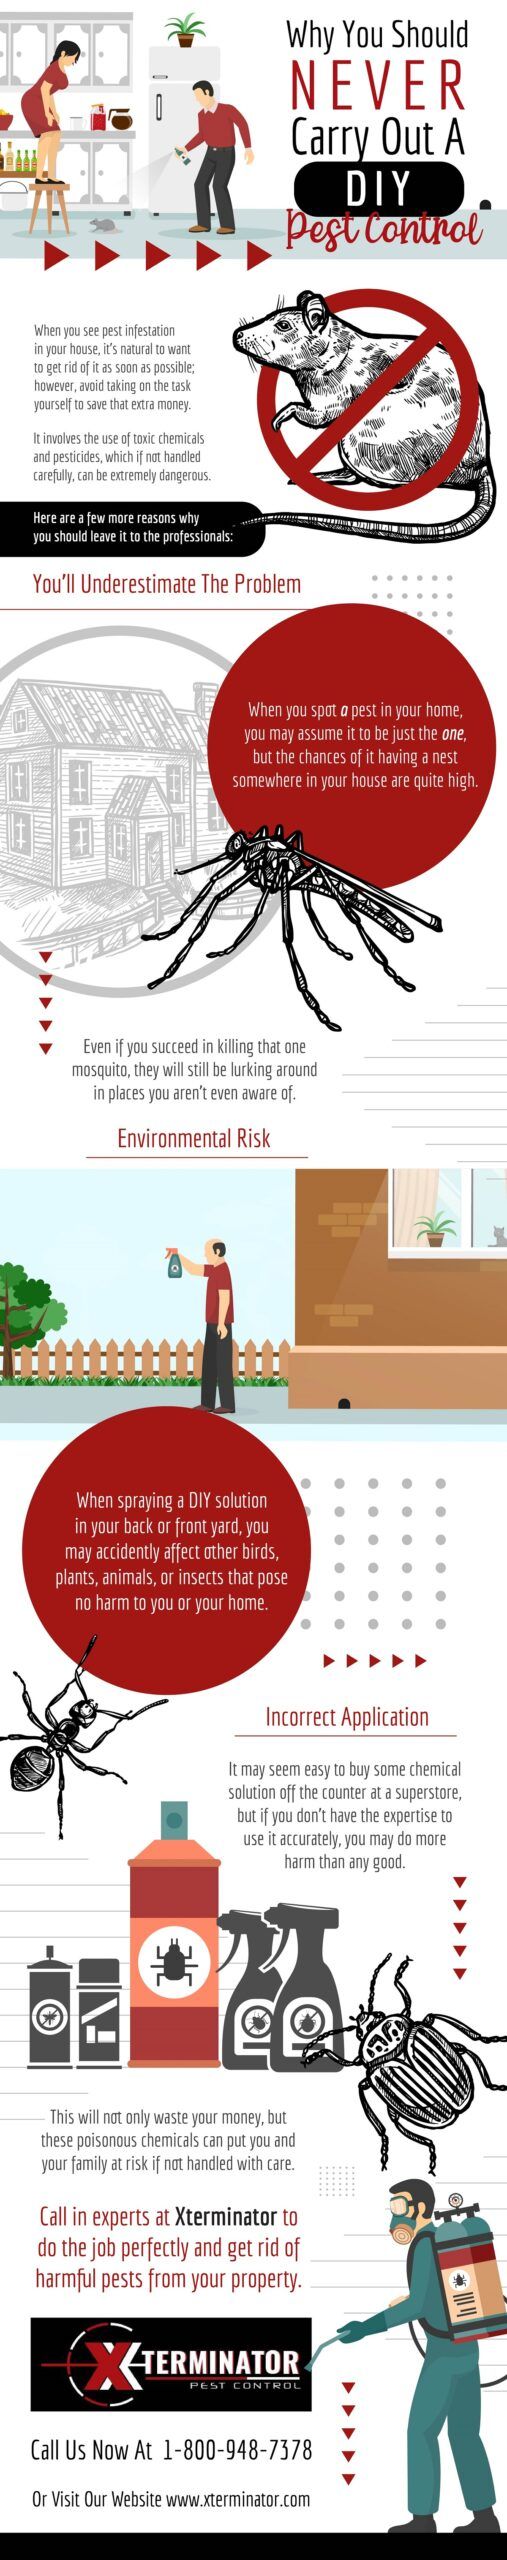 Why You Should Never Carry Out A DIY Pest Control | Infographic